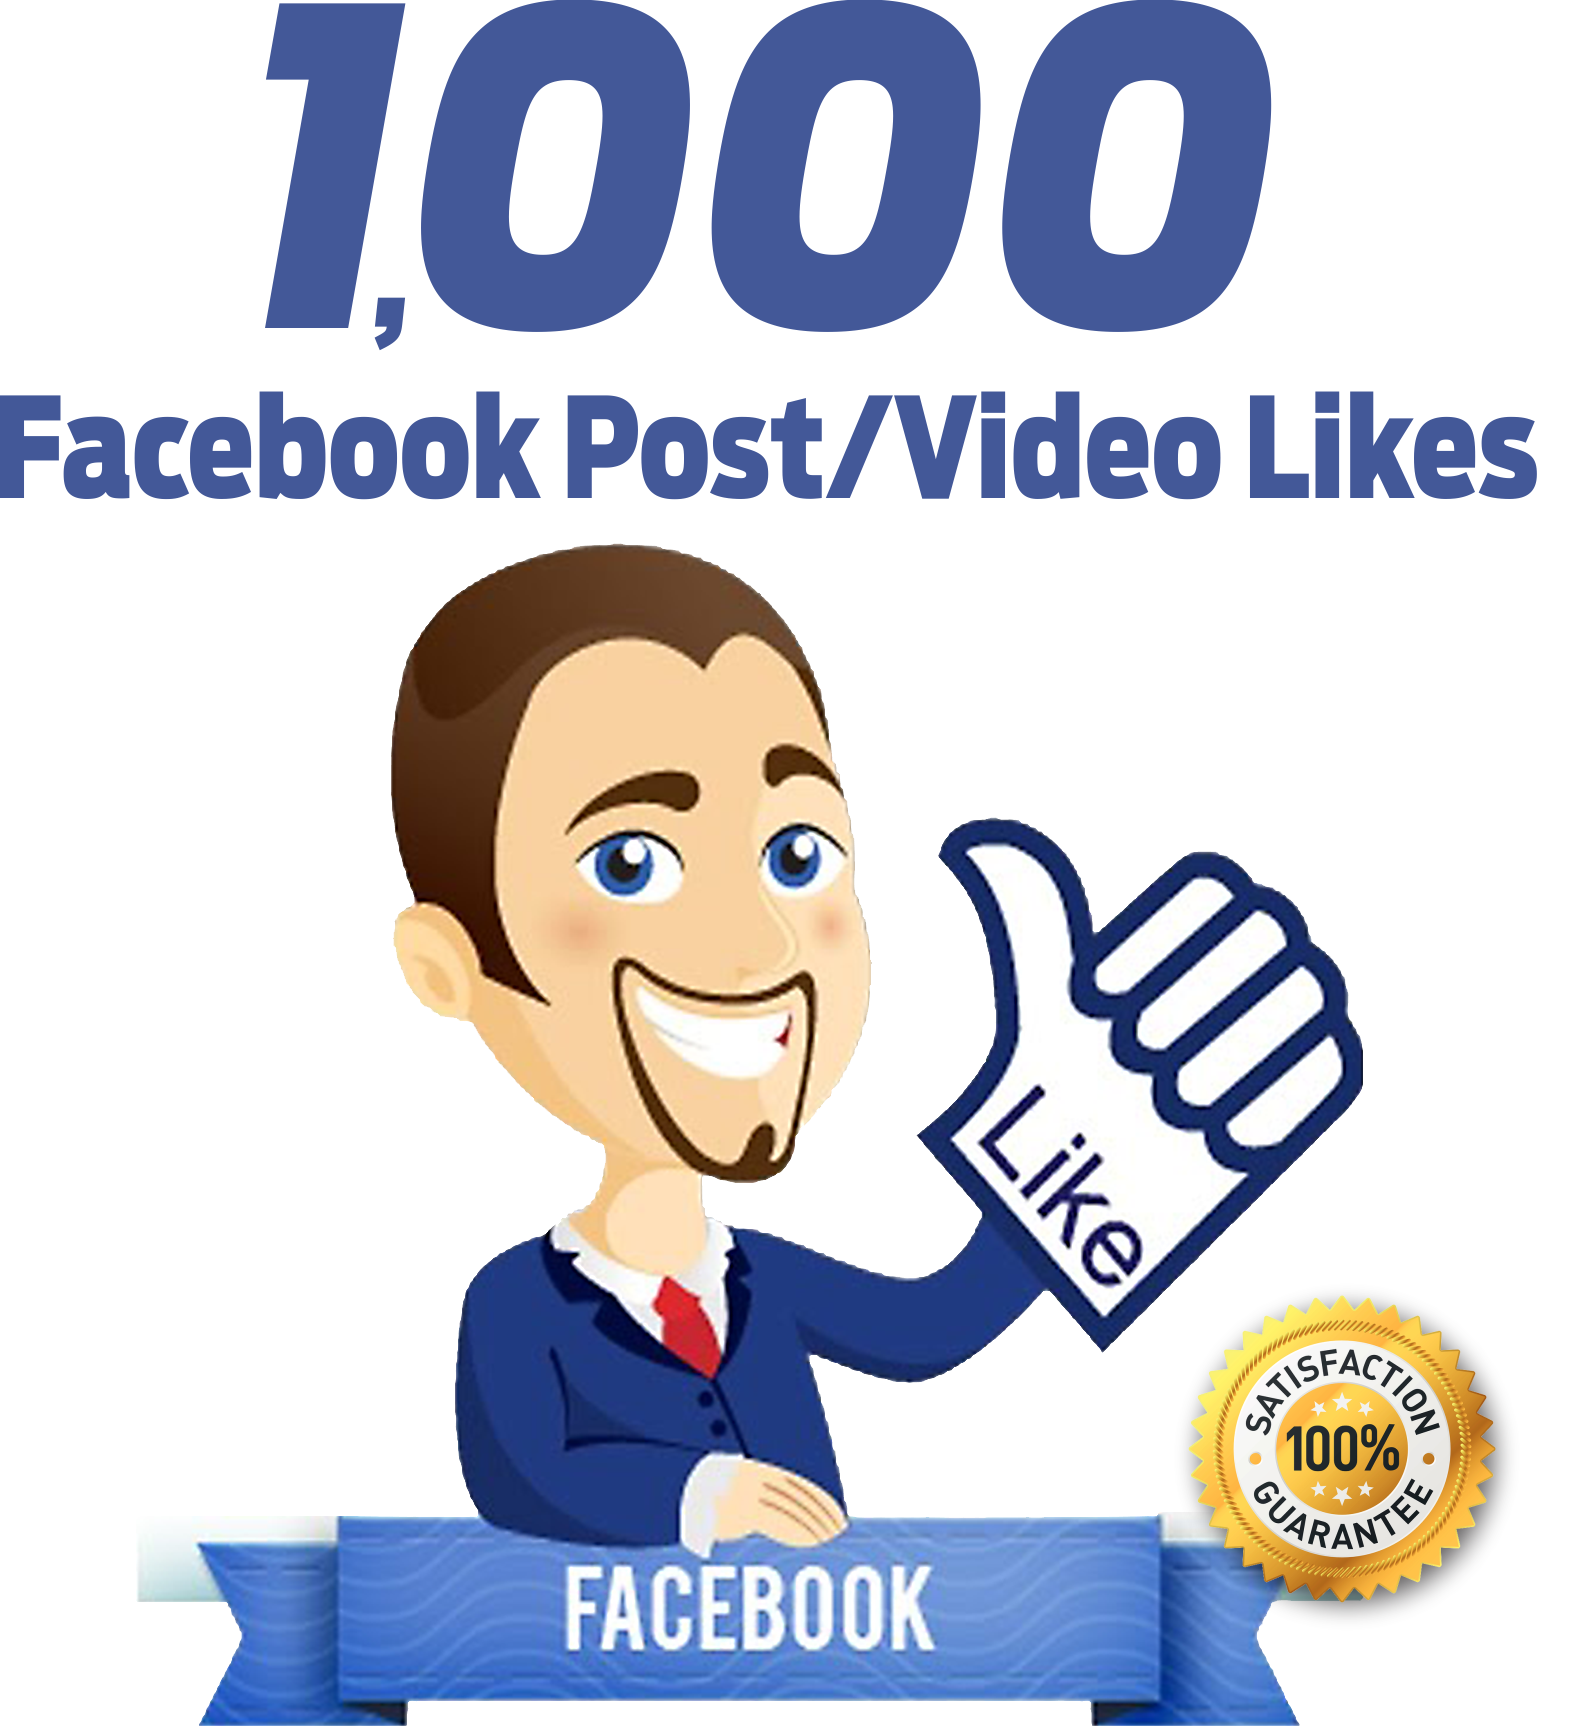 1000 facebook post video likes